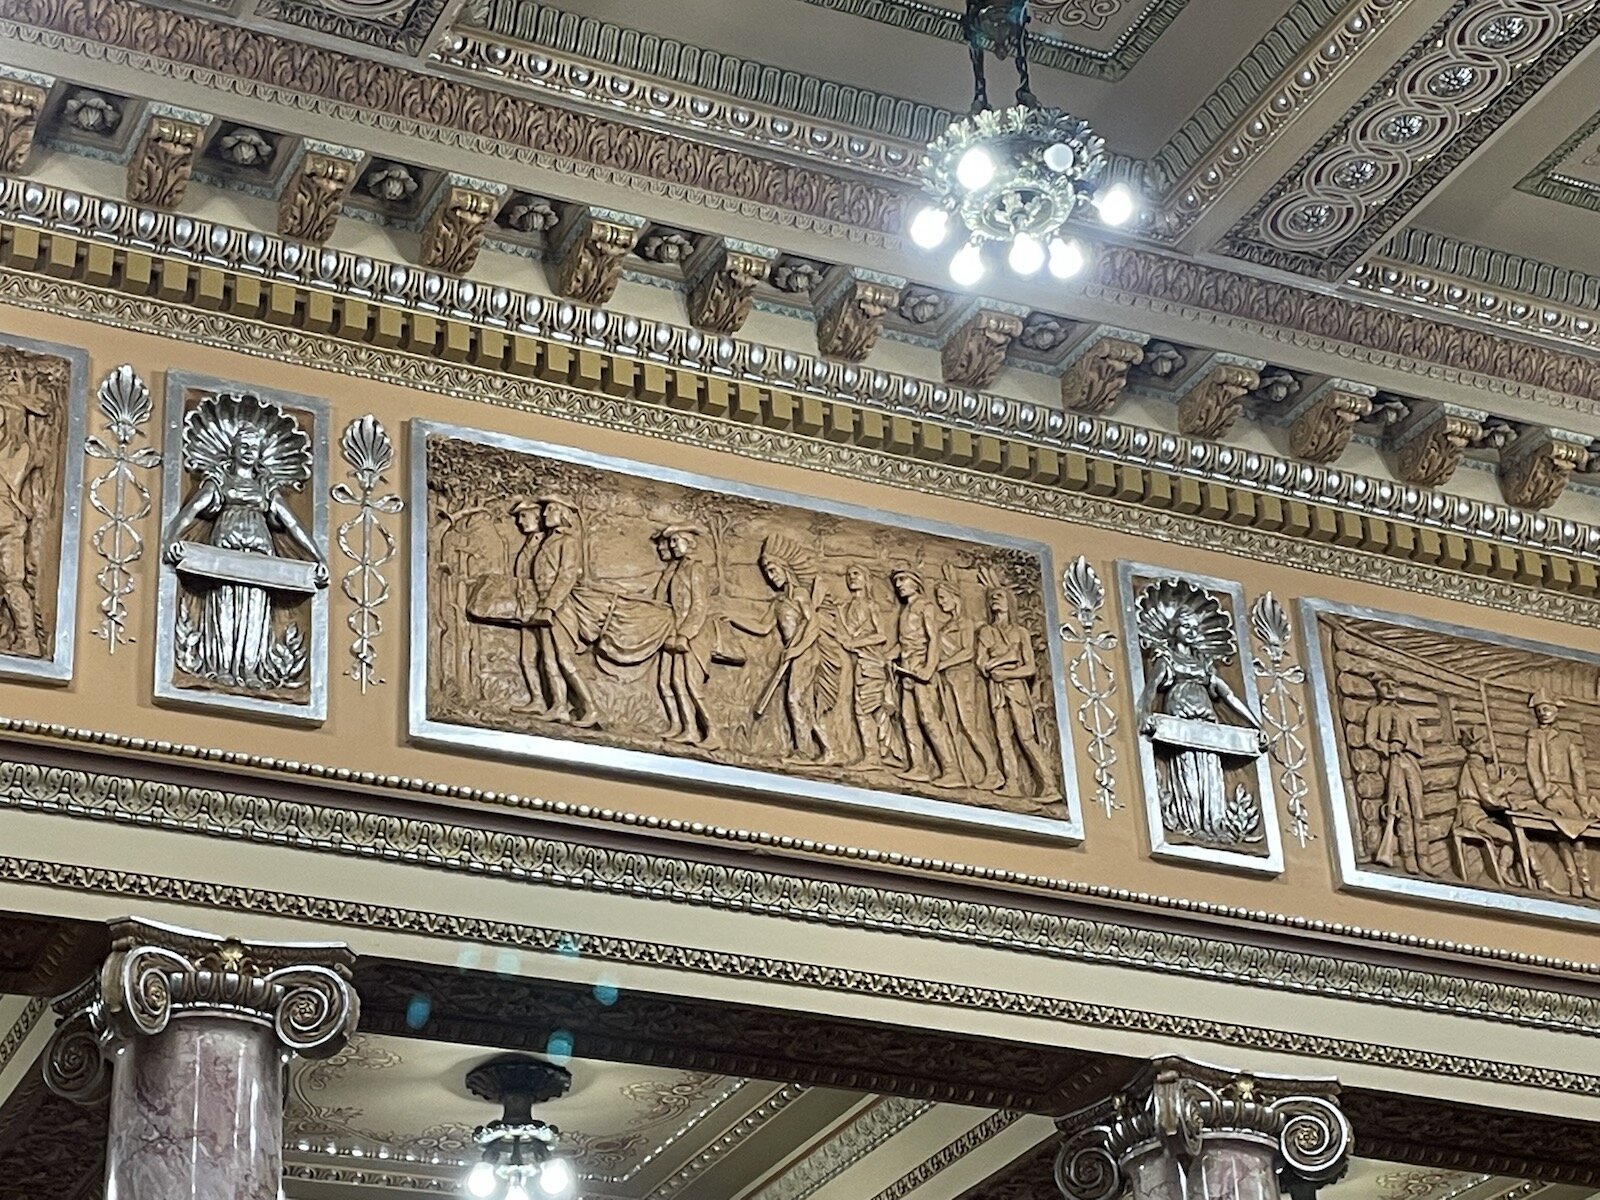 Of the many carvings of significance in the Allen County Courthouse features the burial of Chief Little Turtle, whose precise burial location would be found over a decade after the courthouse was completed.